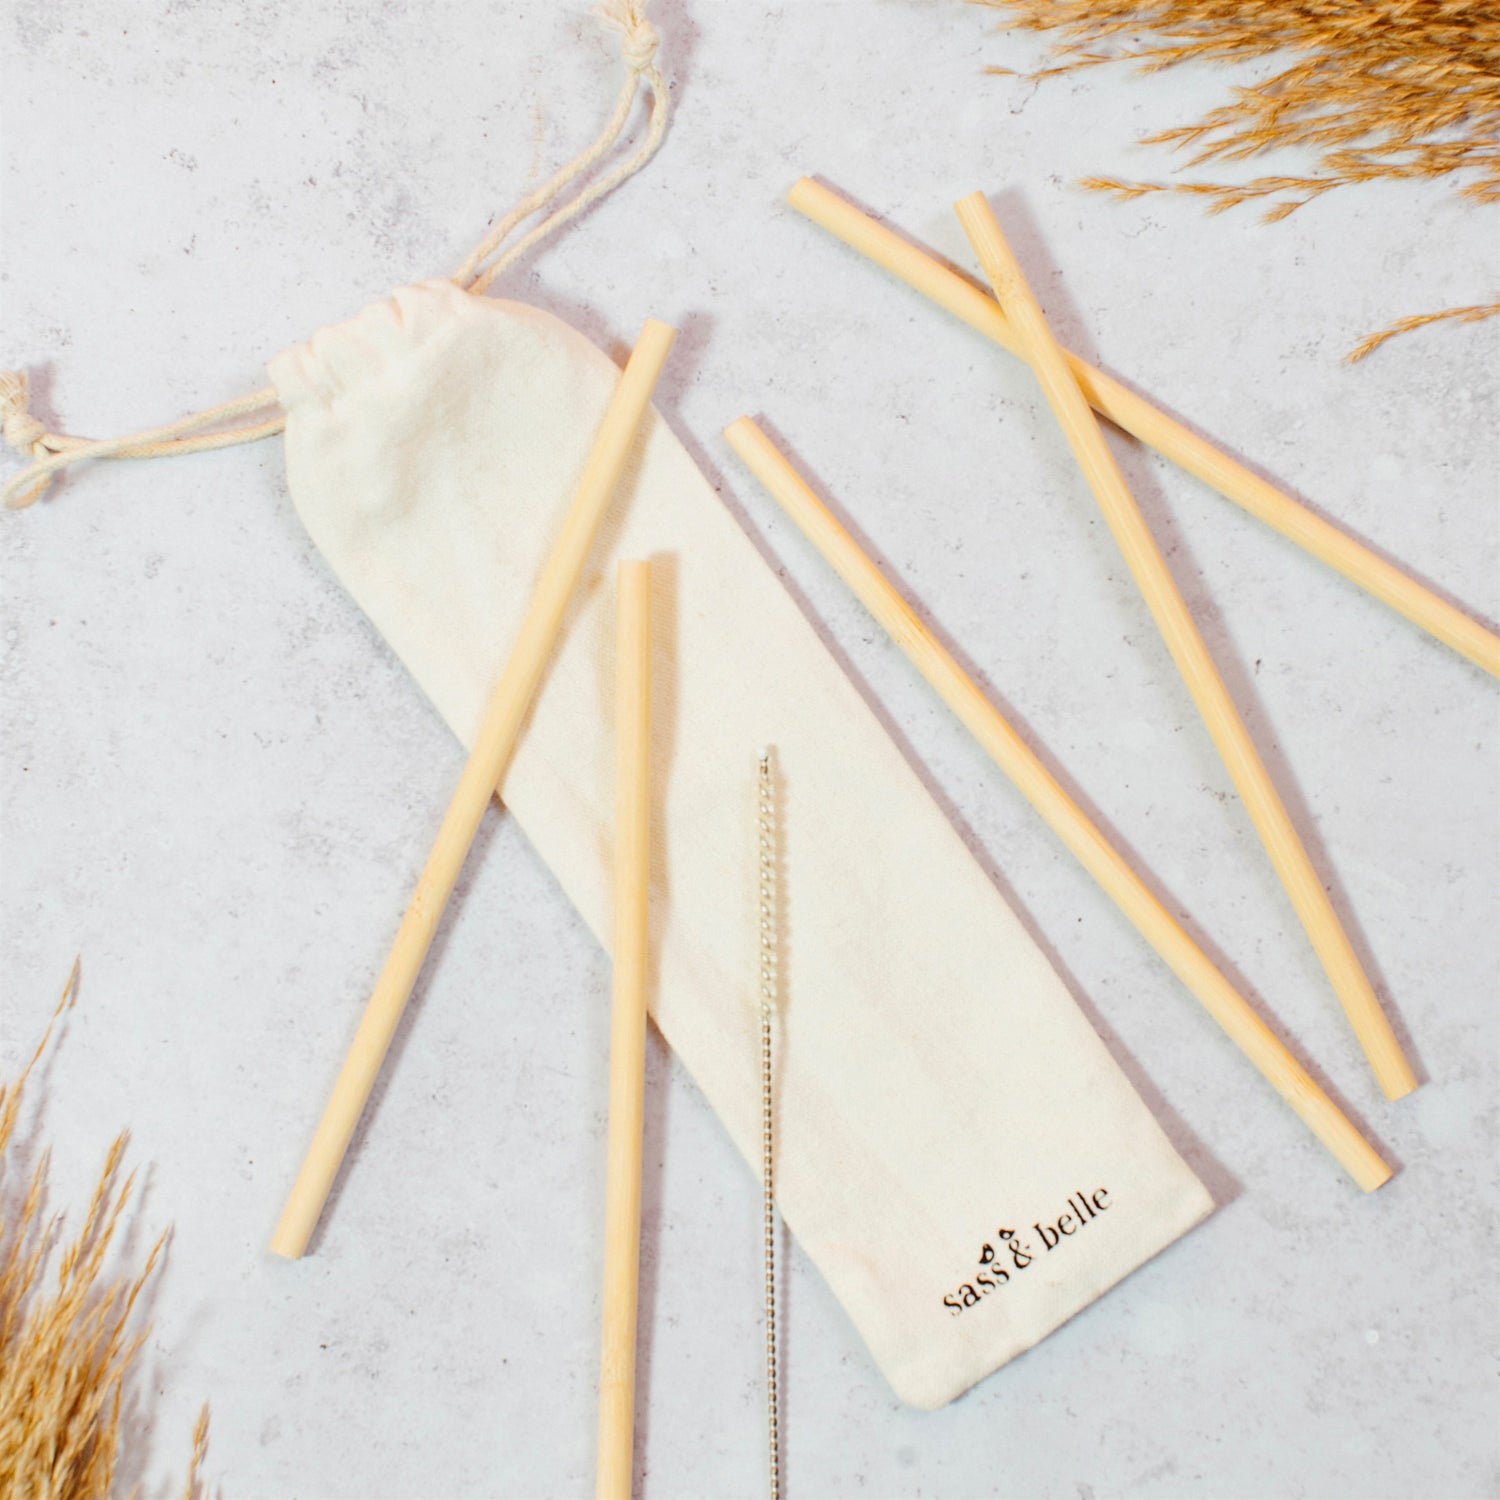 Wave goodbye to plastic with this lovely bamboo straw set.